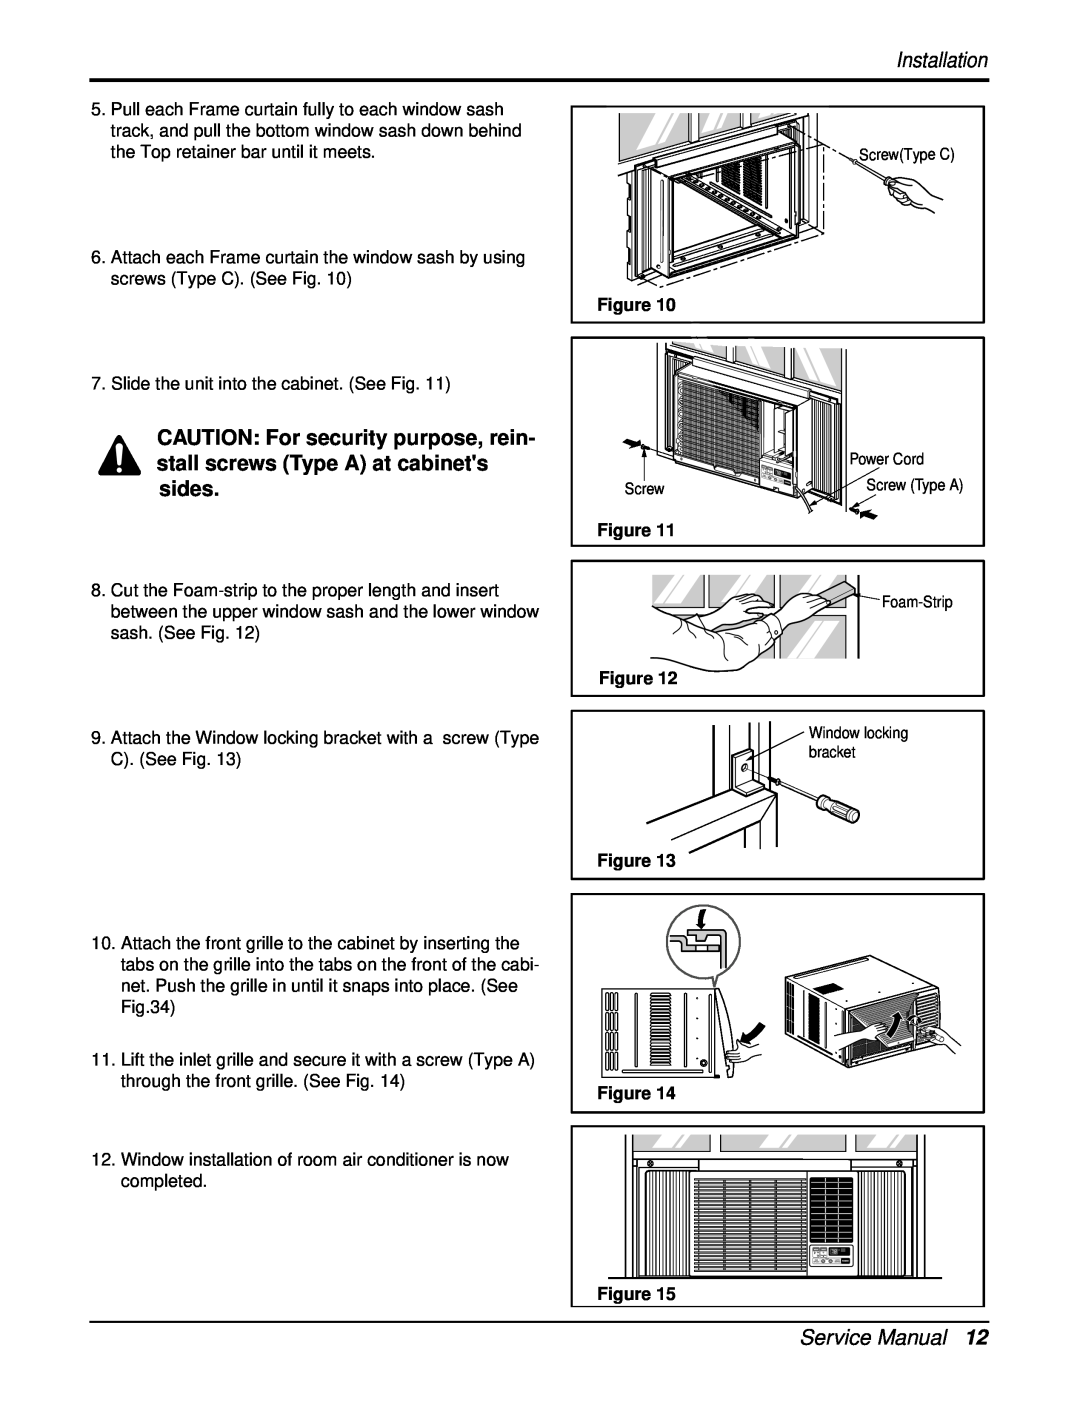 Heat Controller REG-183A, REG-243A manual Installation, Slide the unit into the cabinet. See Fig 